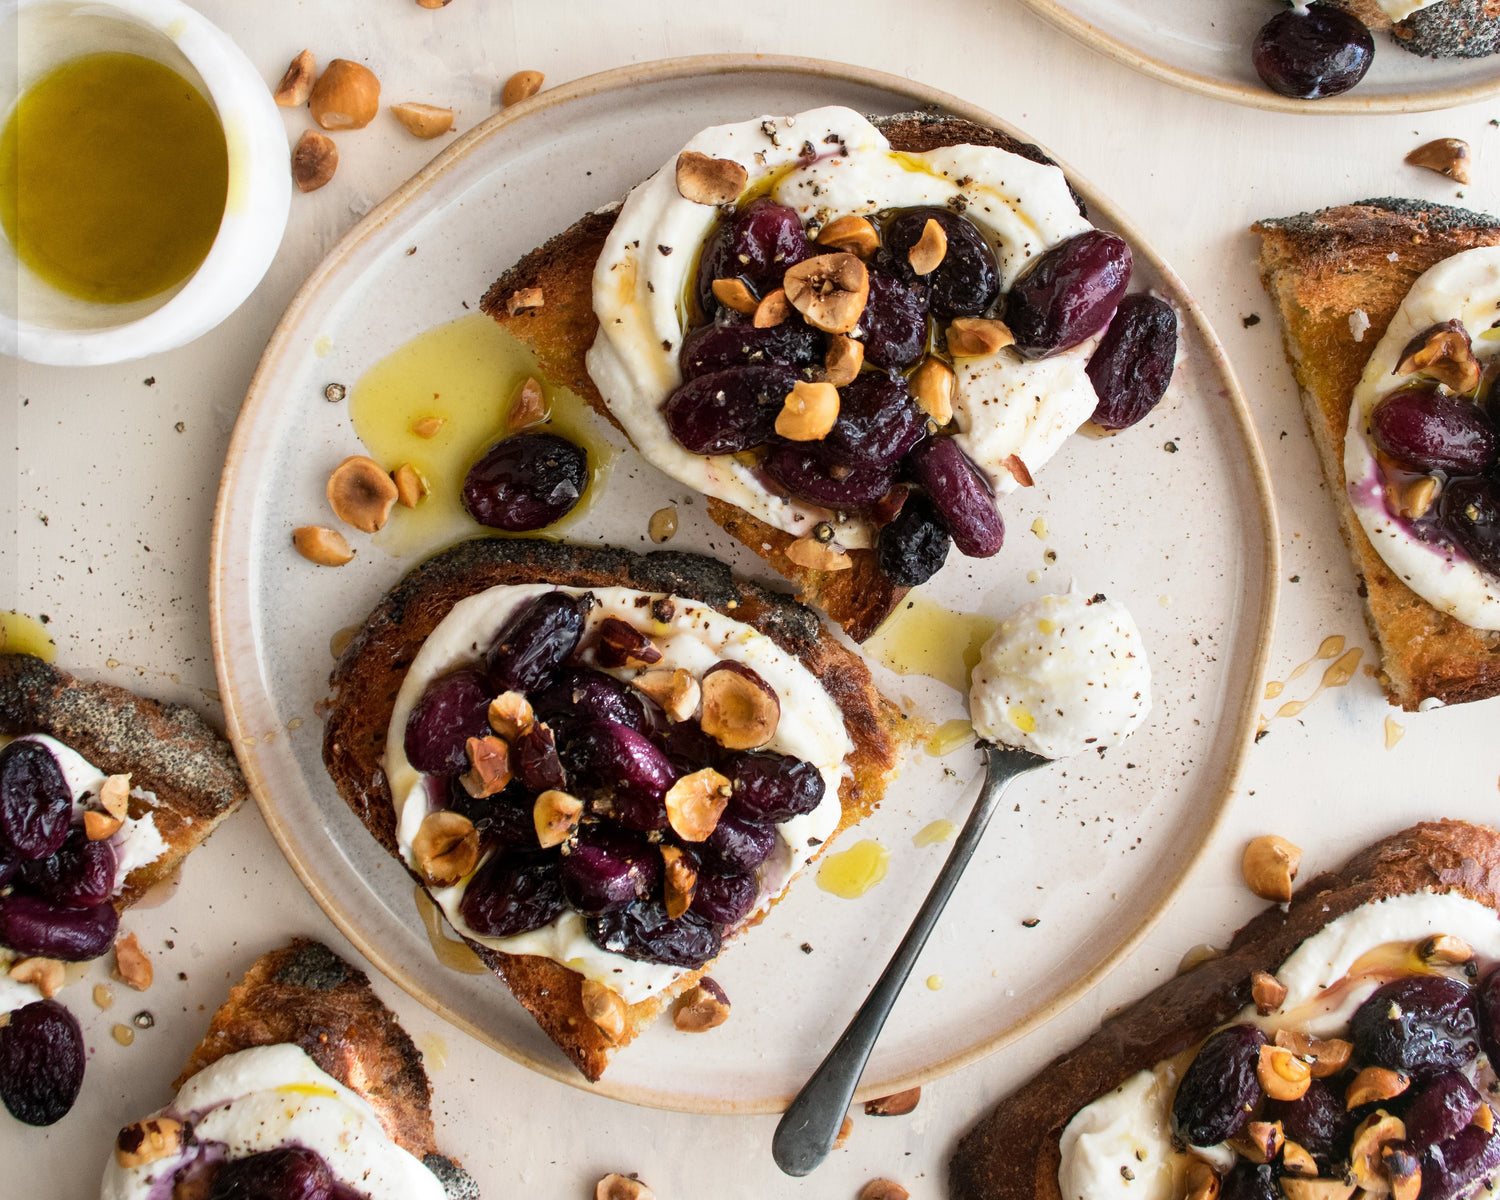 A Chef and Food Blogger's Perfect Roasted Grape and Ricotta Toast